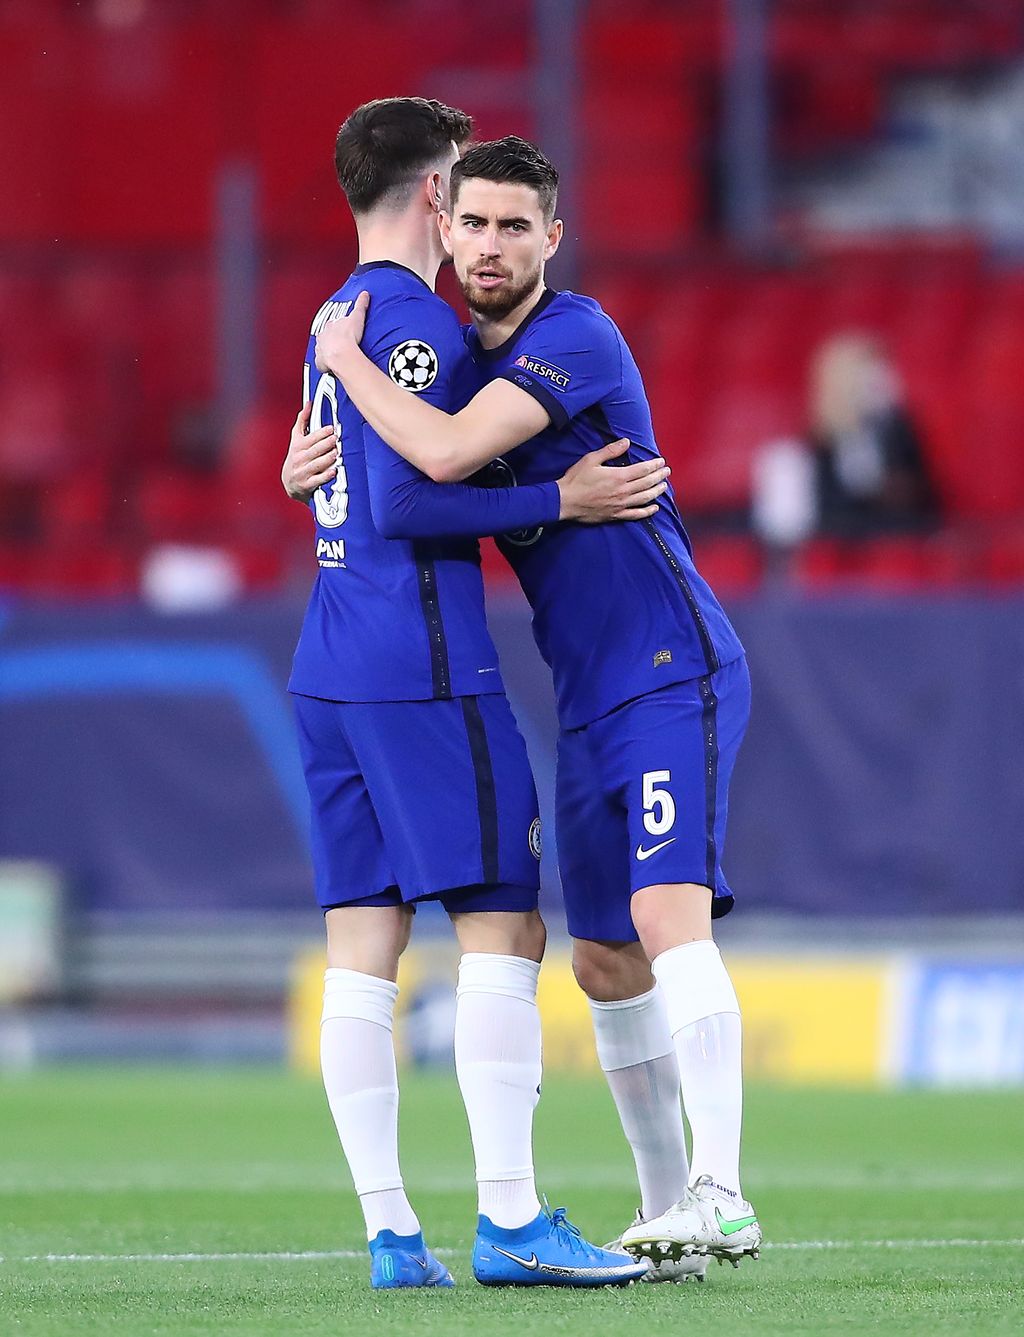 SEVILLE, SPAIN - APRIL 13: Jorginho and Mason Mount of Chelsea CF celebrate during the UEFA Champions League Quarter Final Second Leg match between Chelsea FC and FC Porto at Estadio Ramon Sanchez Pizjuan on April 13, 2021 in Seville, Spain. Sporting stadiums around Spain remain under strict restrictions due to the Coronavirus Pandemic as Government social distancing laws prohibit fans inside venues resulting in games being played behind closed doors. (Photo by Fran Santiago/Getty Images)